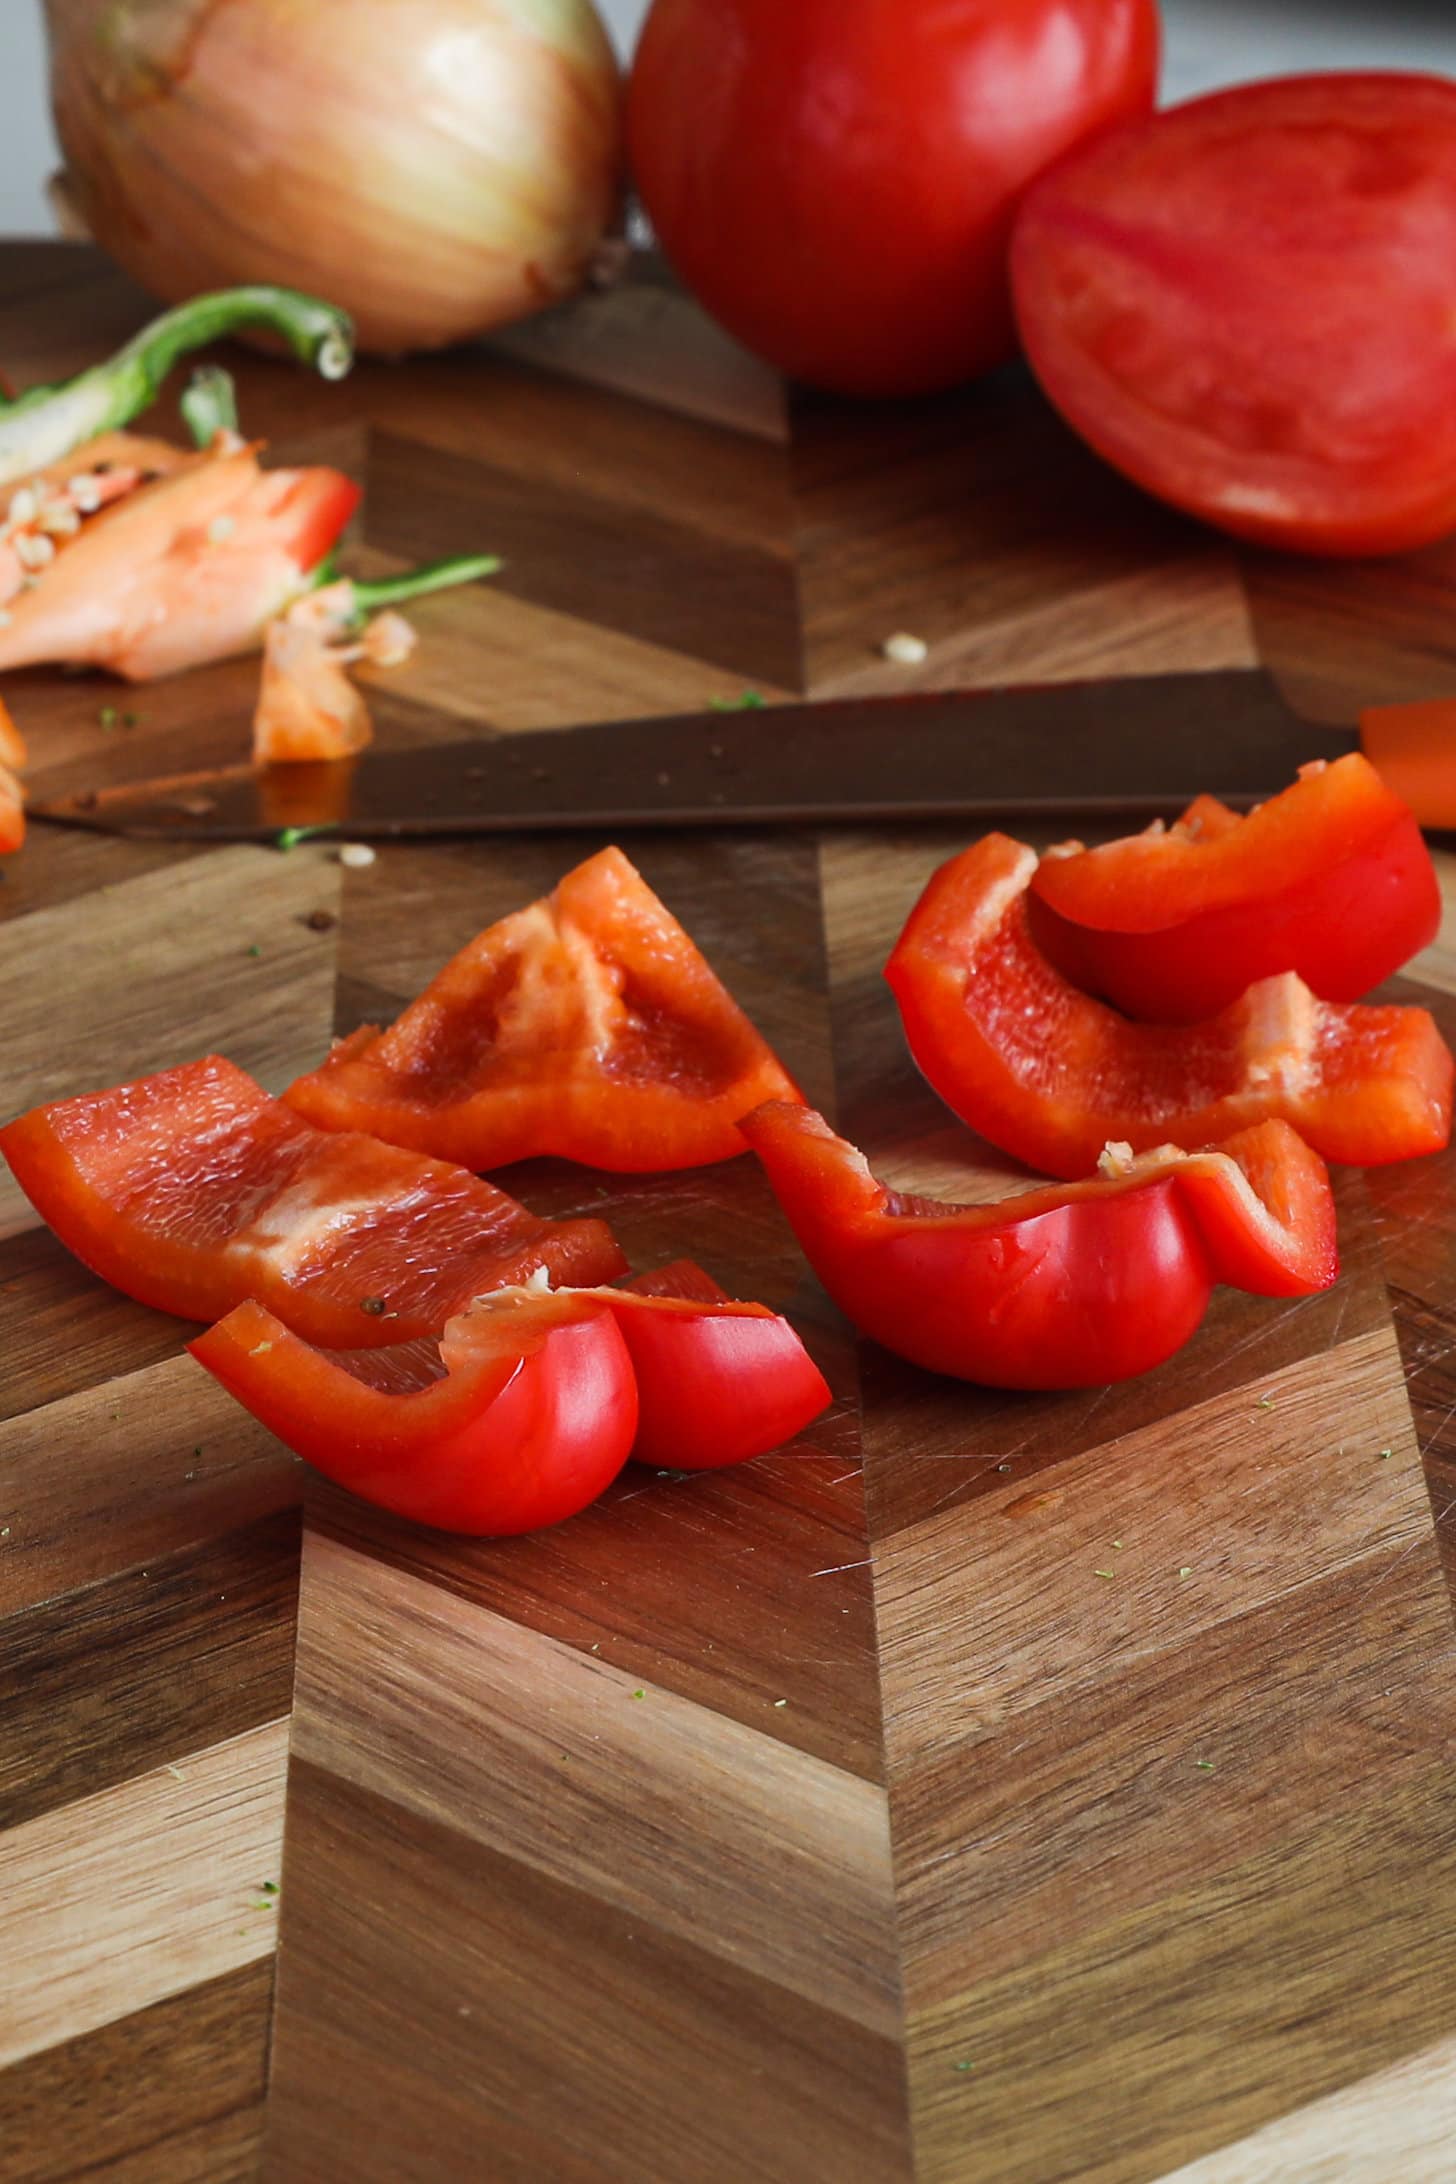 Chopped red pepper on a wooden board.